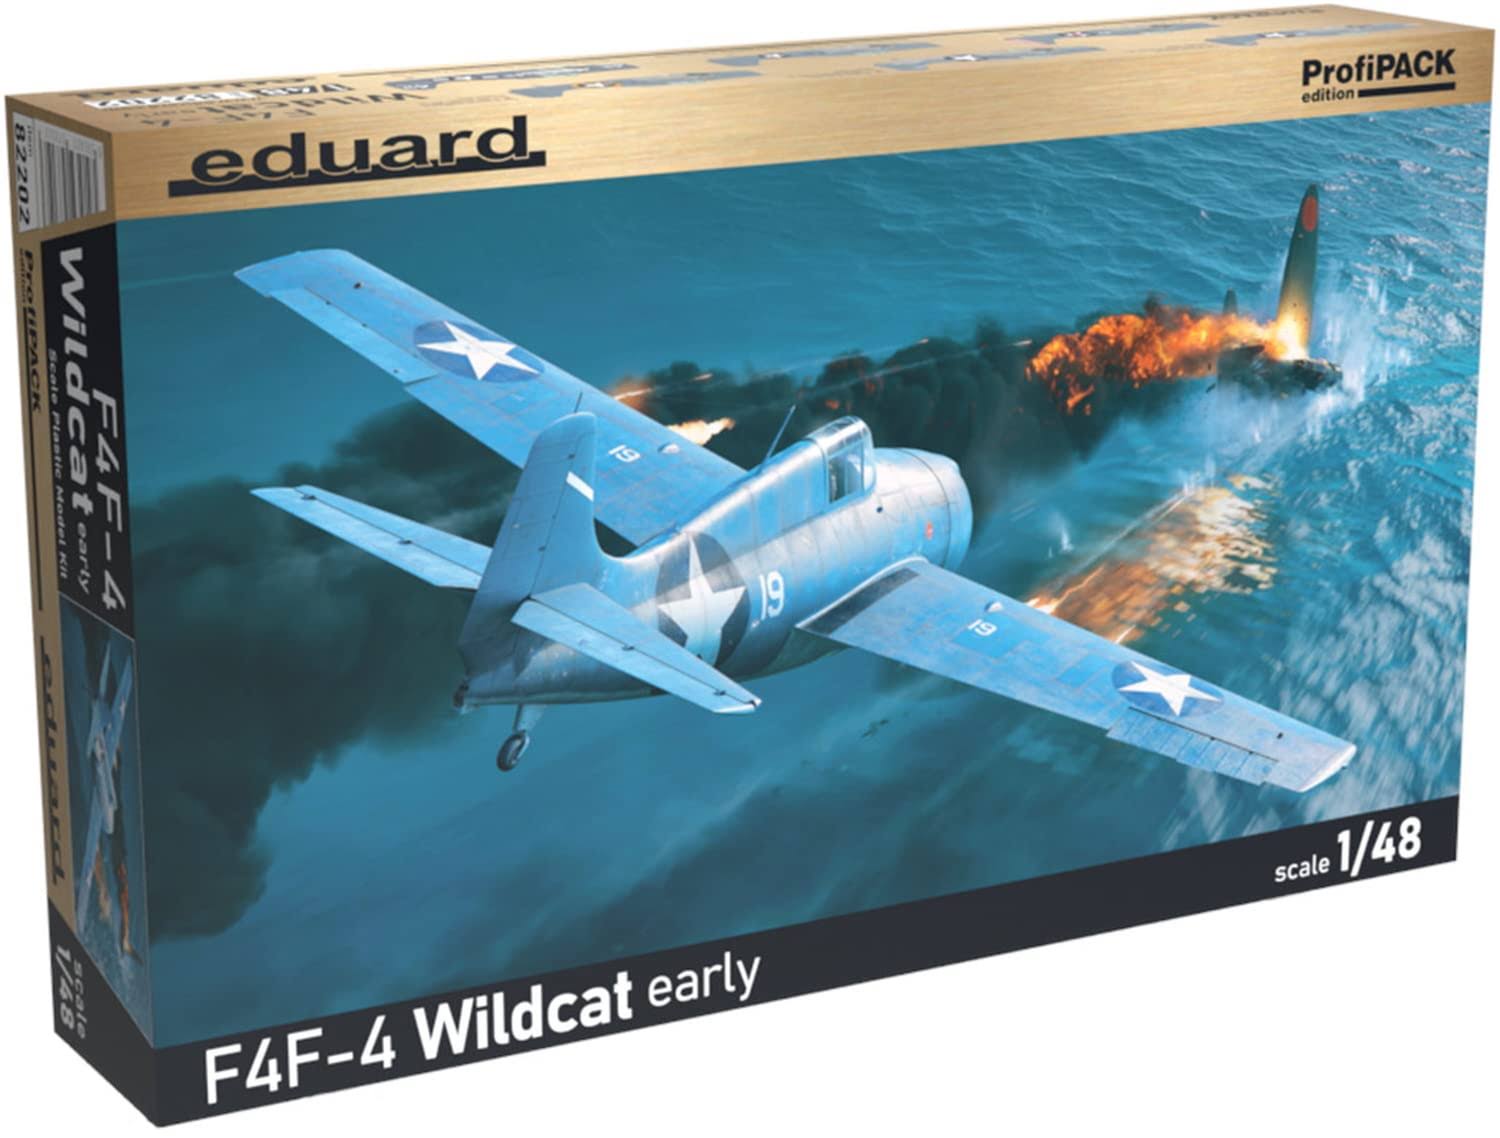 Eduard F4F-4 Wildcat Early Profipack Edition Model | 1/48 Scale | 82202